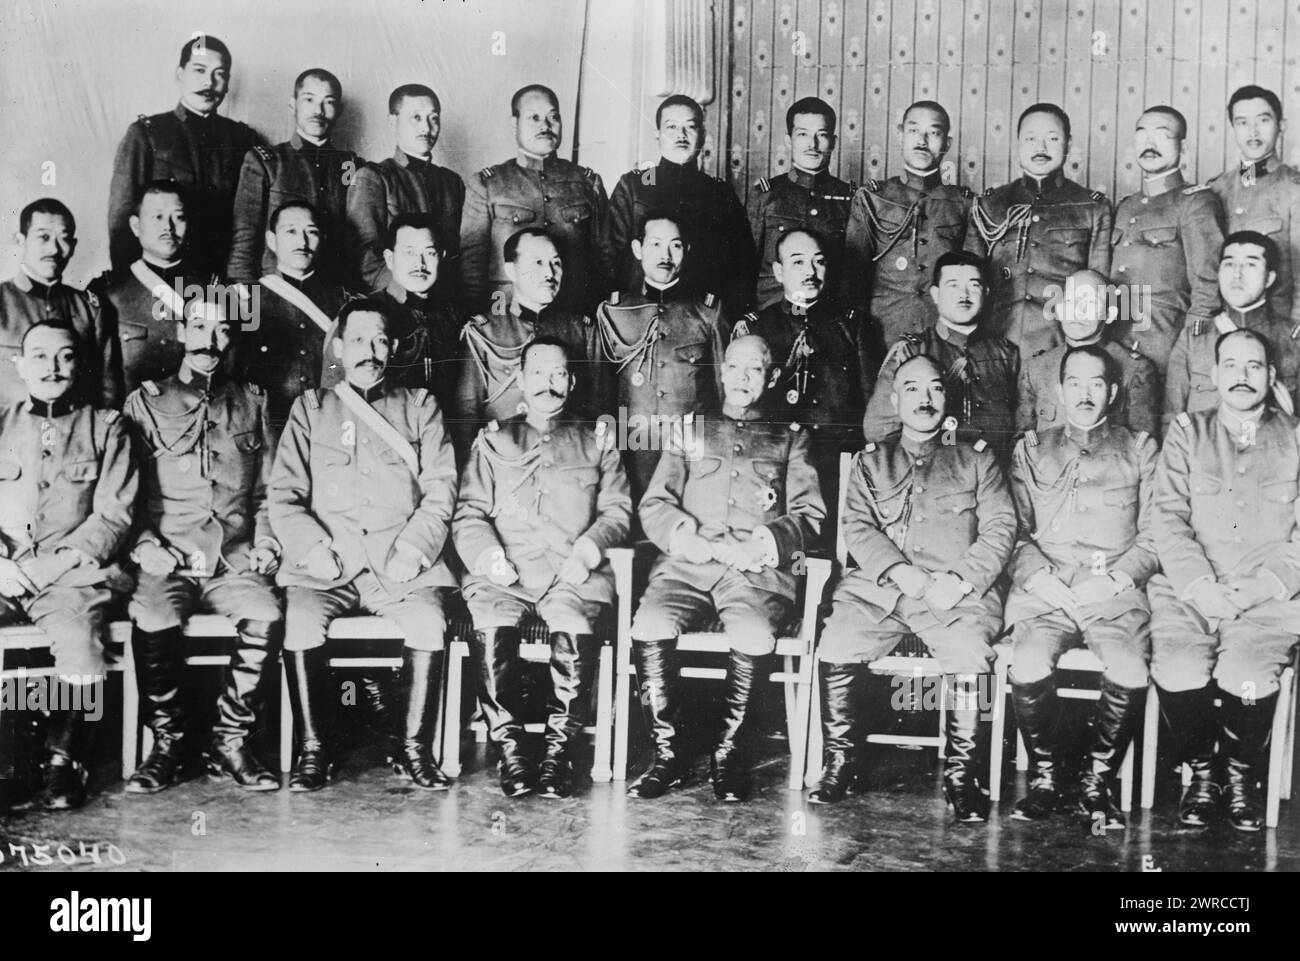 Gen. Otani & staff, Photograph shows General Kikuzo Otani, commander-in-chief of the Allied forces in eastern Siberia, Russia with his staff officers, Japanese headquarters, Vladivostok, Siberia., between 1918 and ca. 1920, Glass negatives, 1 negative: glass Stock Photo